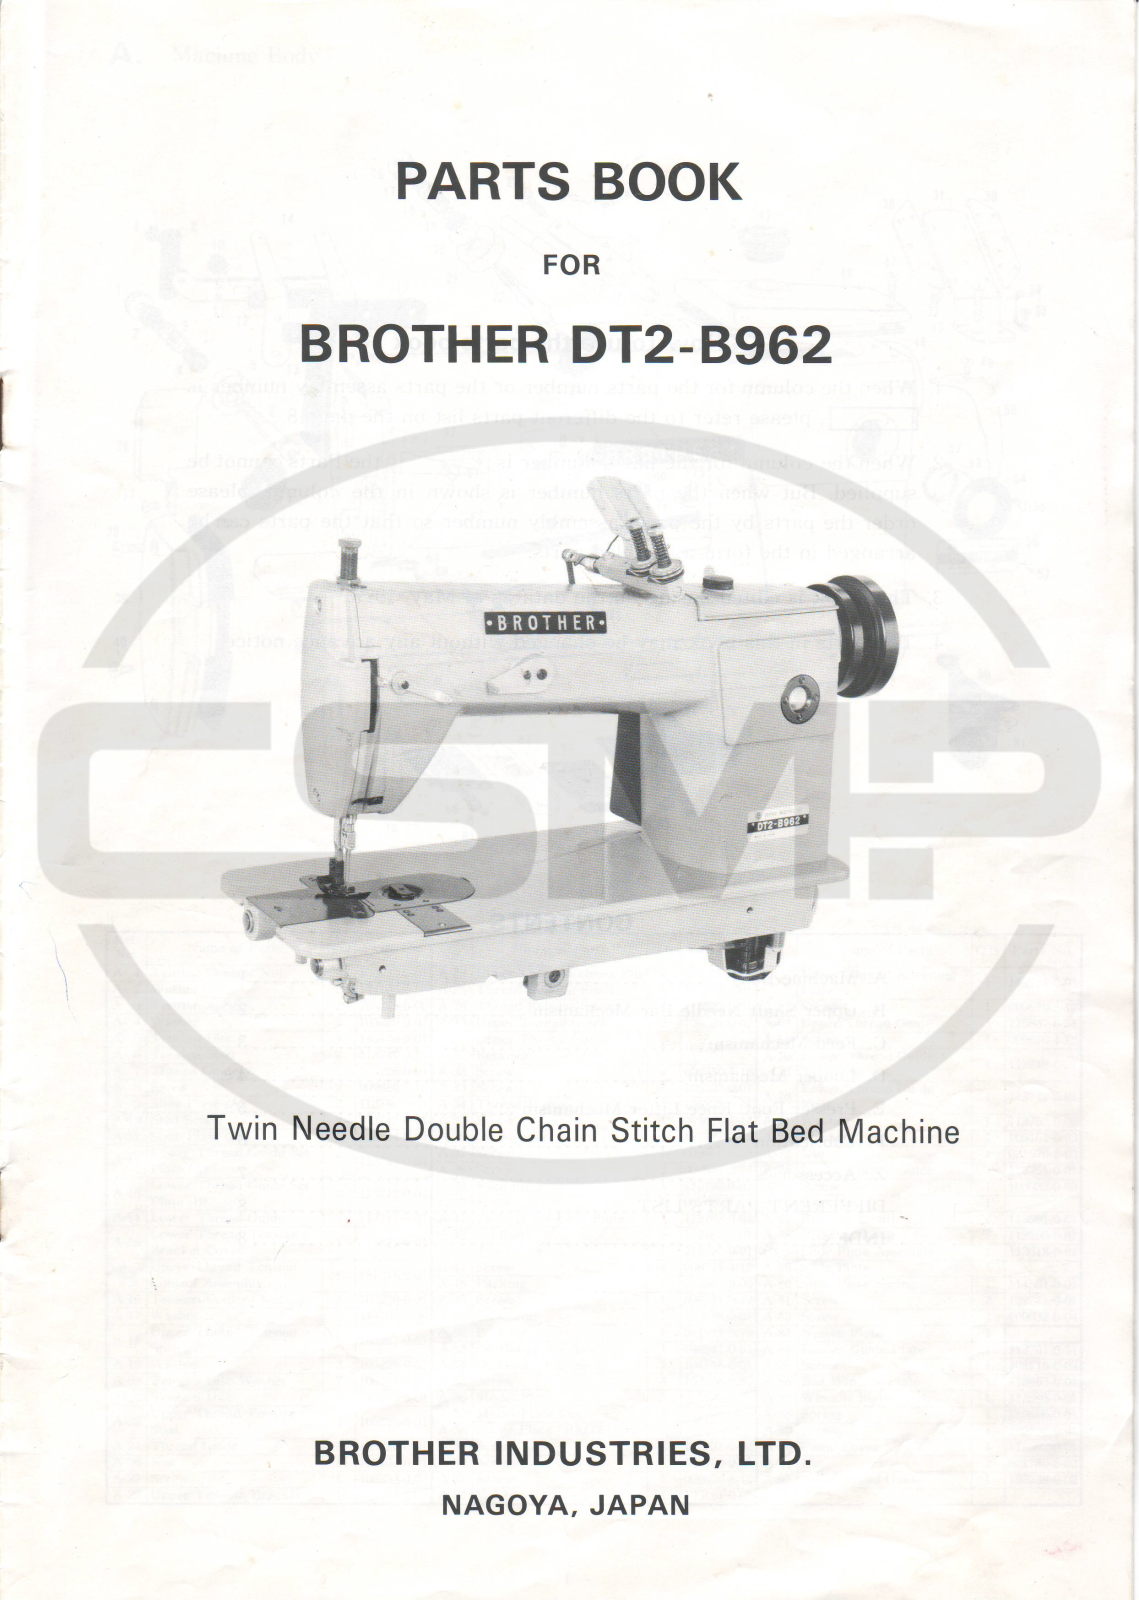 Brother DT2 B962 Parts Book